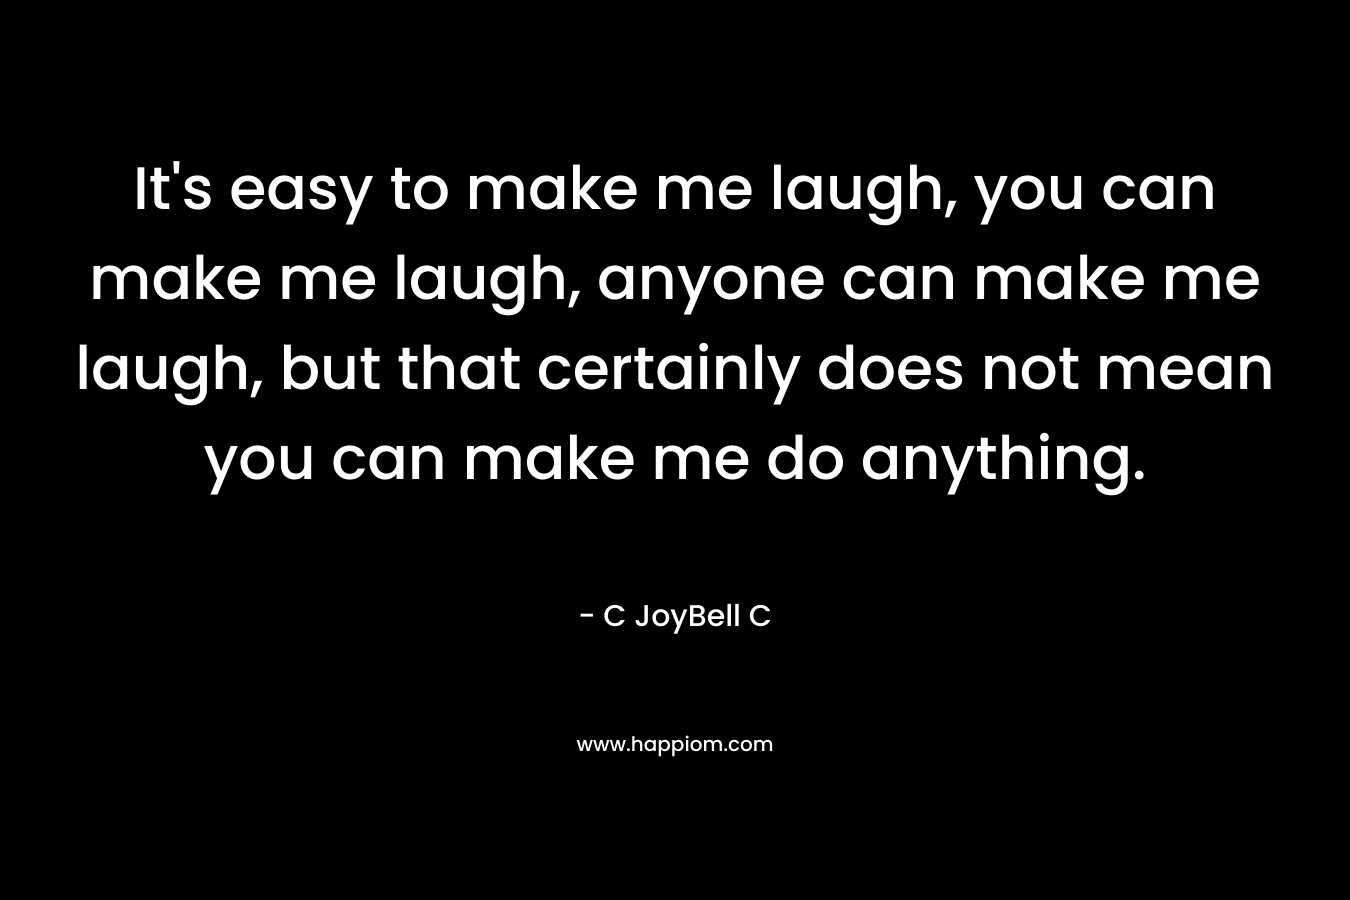 It's easy to make me laugh, you can make me laugh, anyone can make me laugh, but that certainly does not mean you can make me do anything.